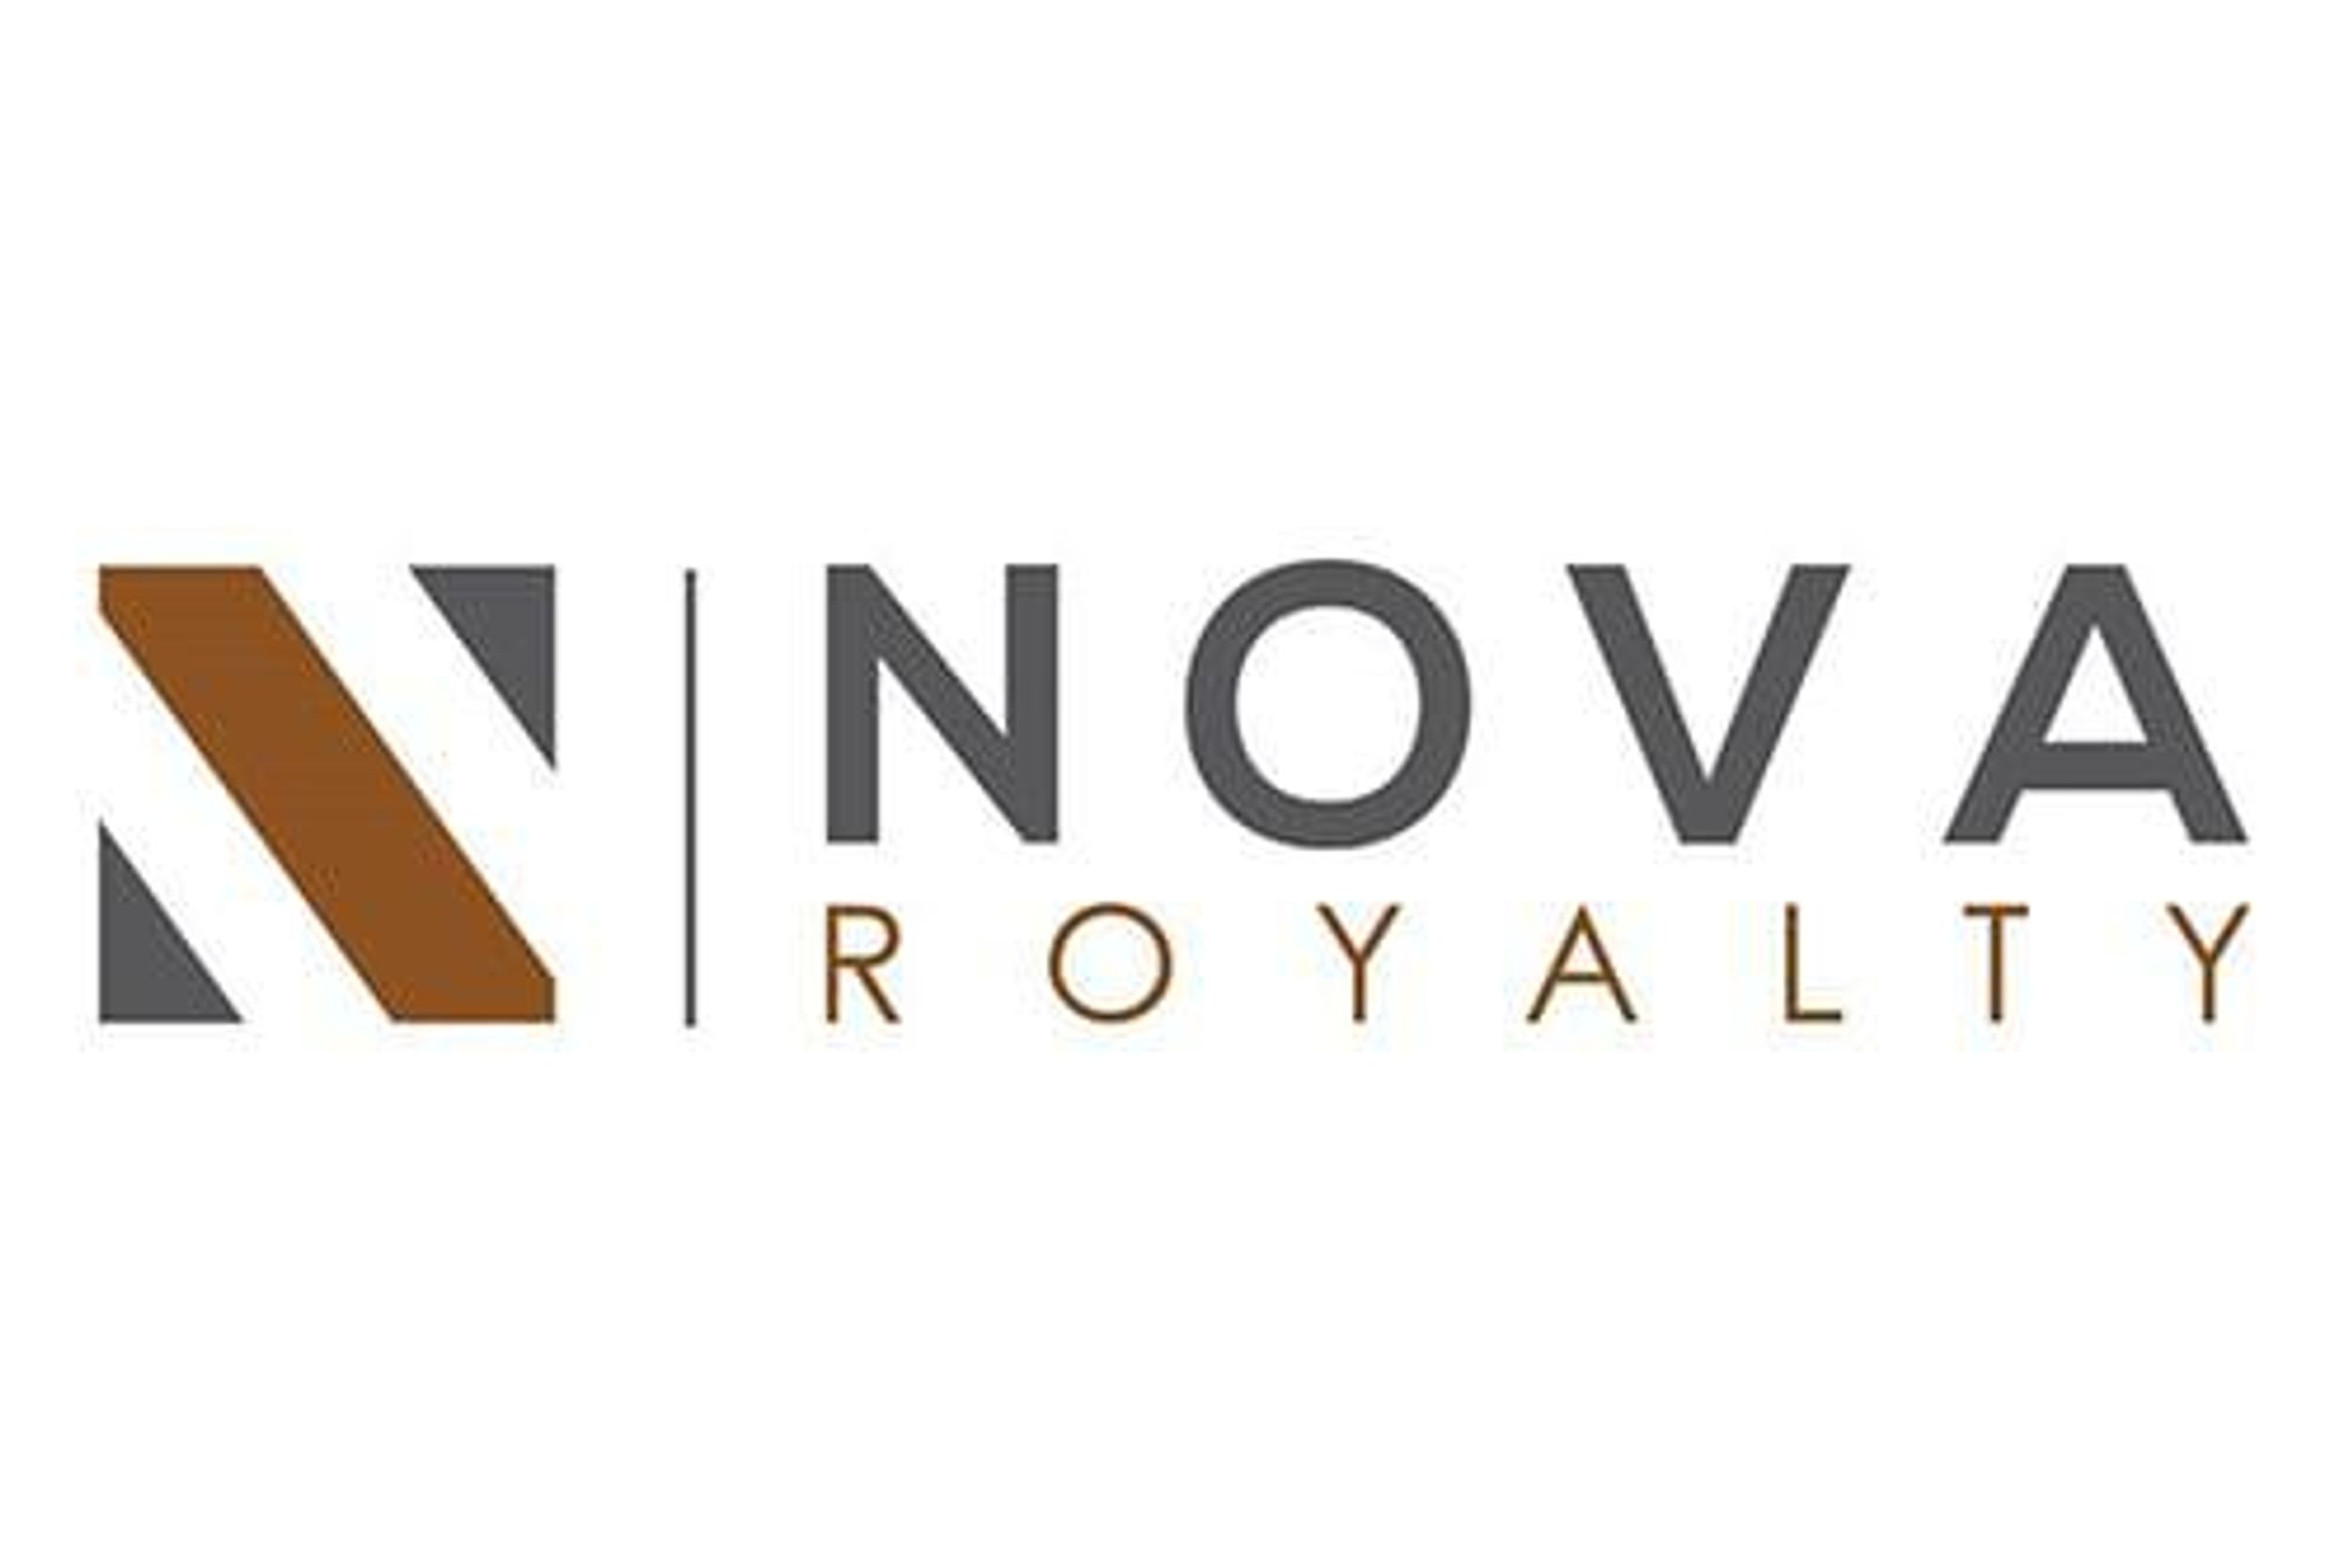 NOVA ROYALTY REPORTS AUDITED FINANCIAL RESULTS FOR THE YEAR ENDED DECEMBER 31, 2021 AND PROVIDES PORTFOLIO UPDATE